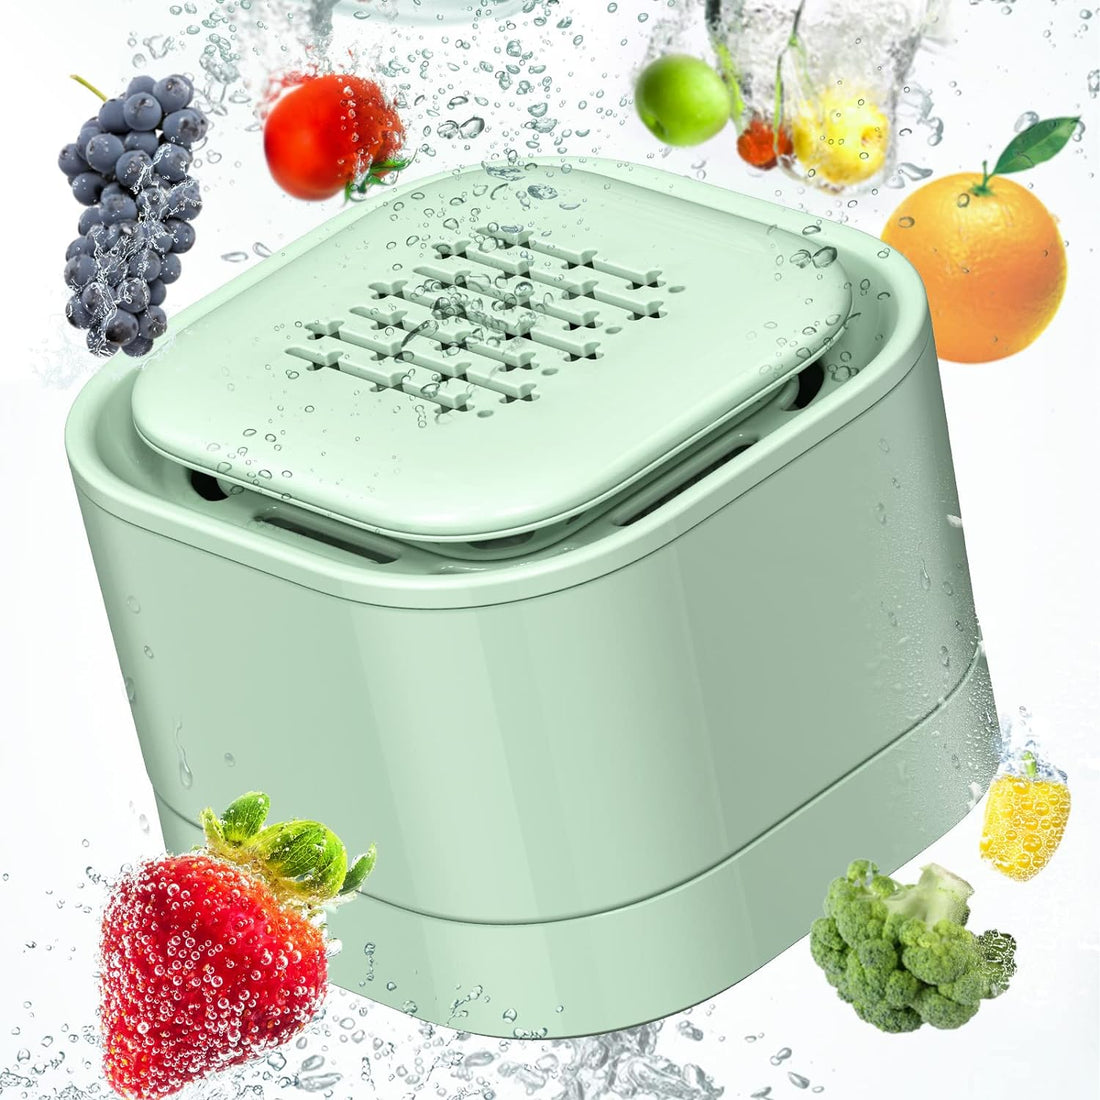 Fruit and Vegetable Washing Machine, Fruit Cleaner Device for Deeply Cleans Fresh Produce, IPX7 Waterproof Wireless Fruit and Vegetable Purifier, OH-Ion Purification Technology Detachable Cleaning